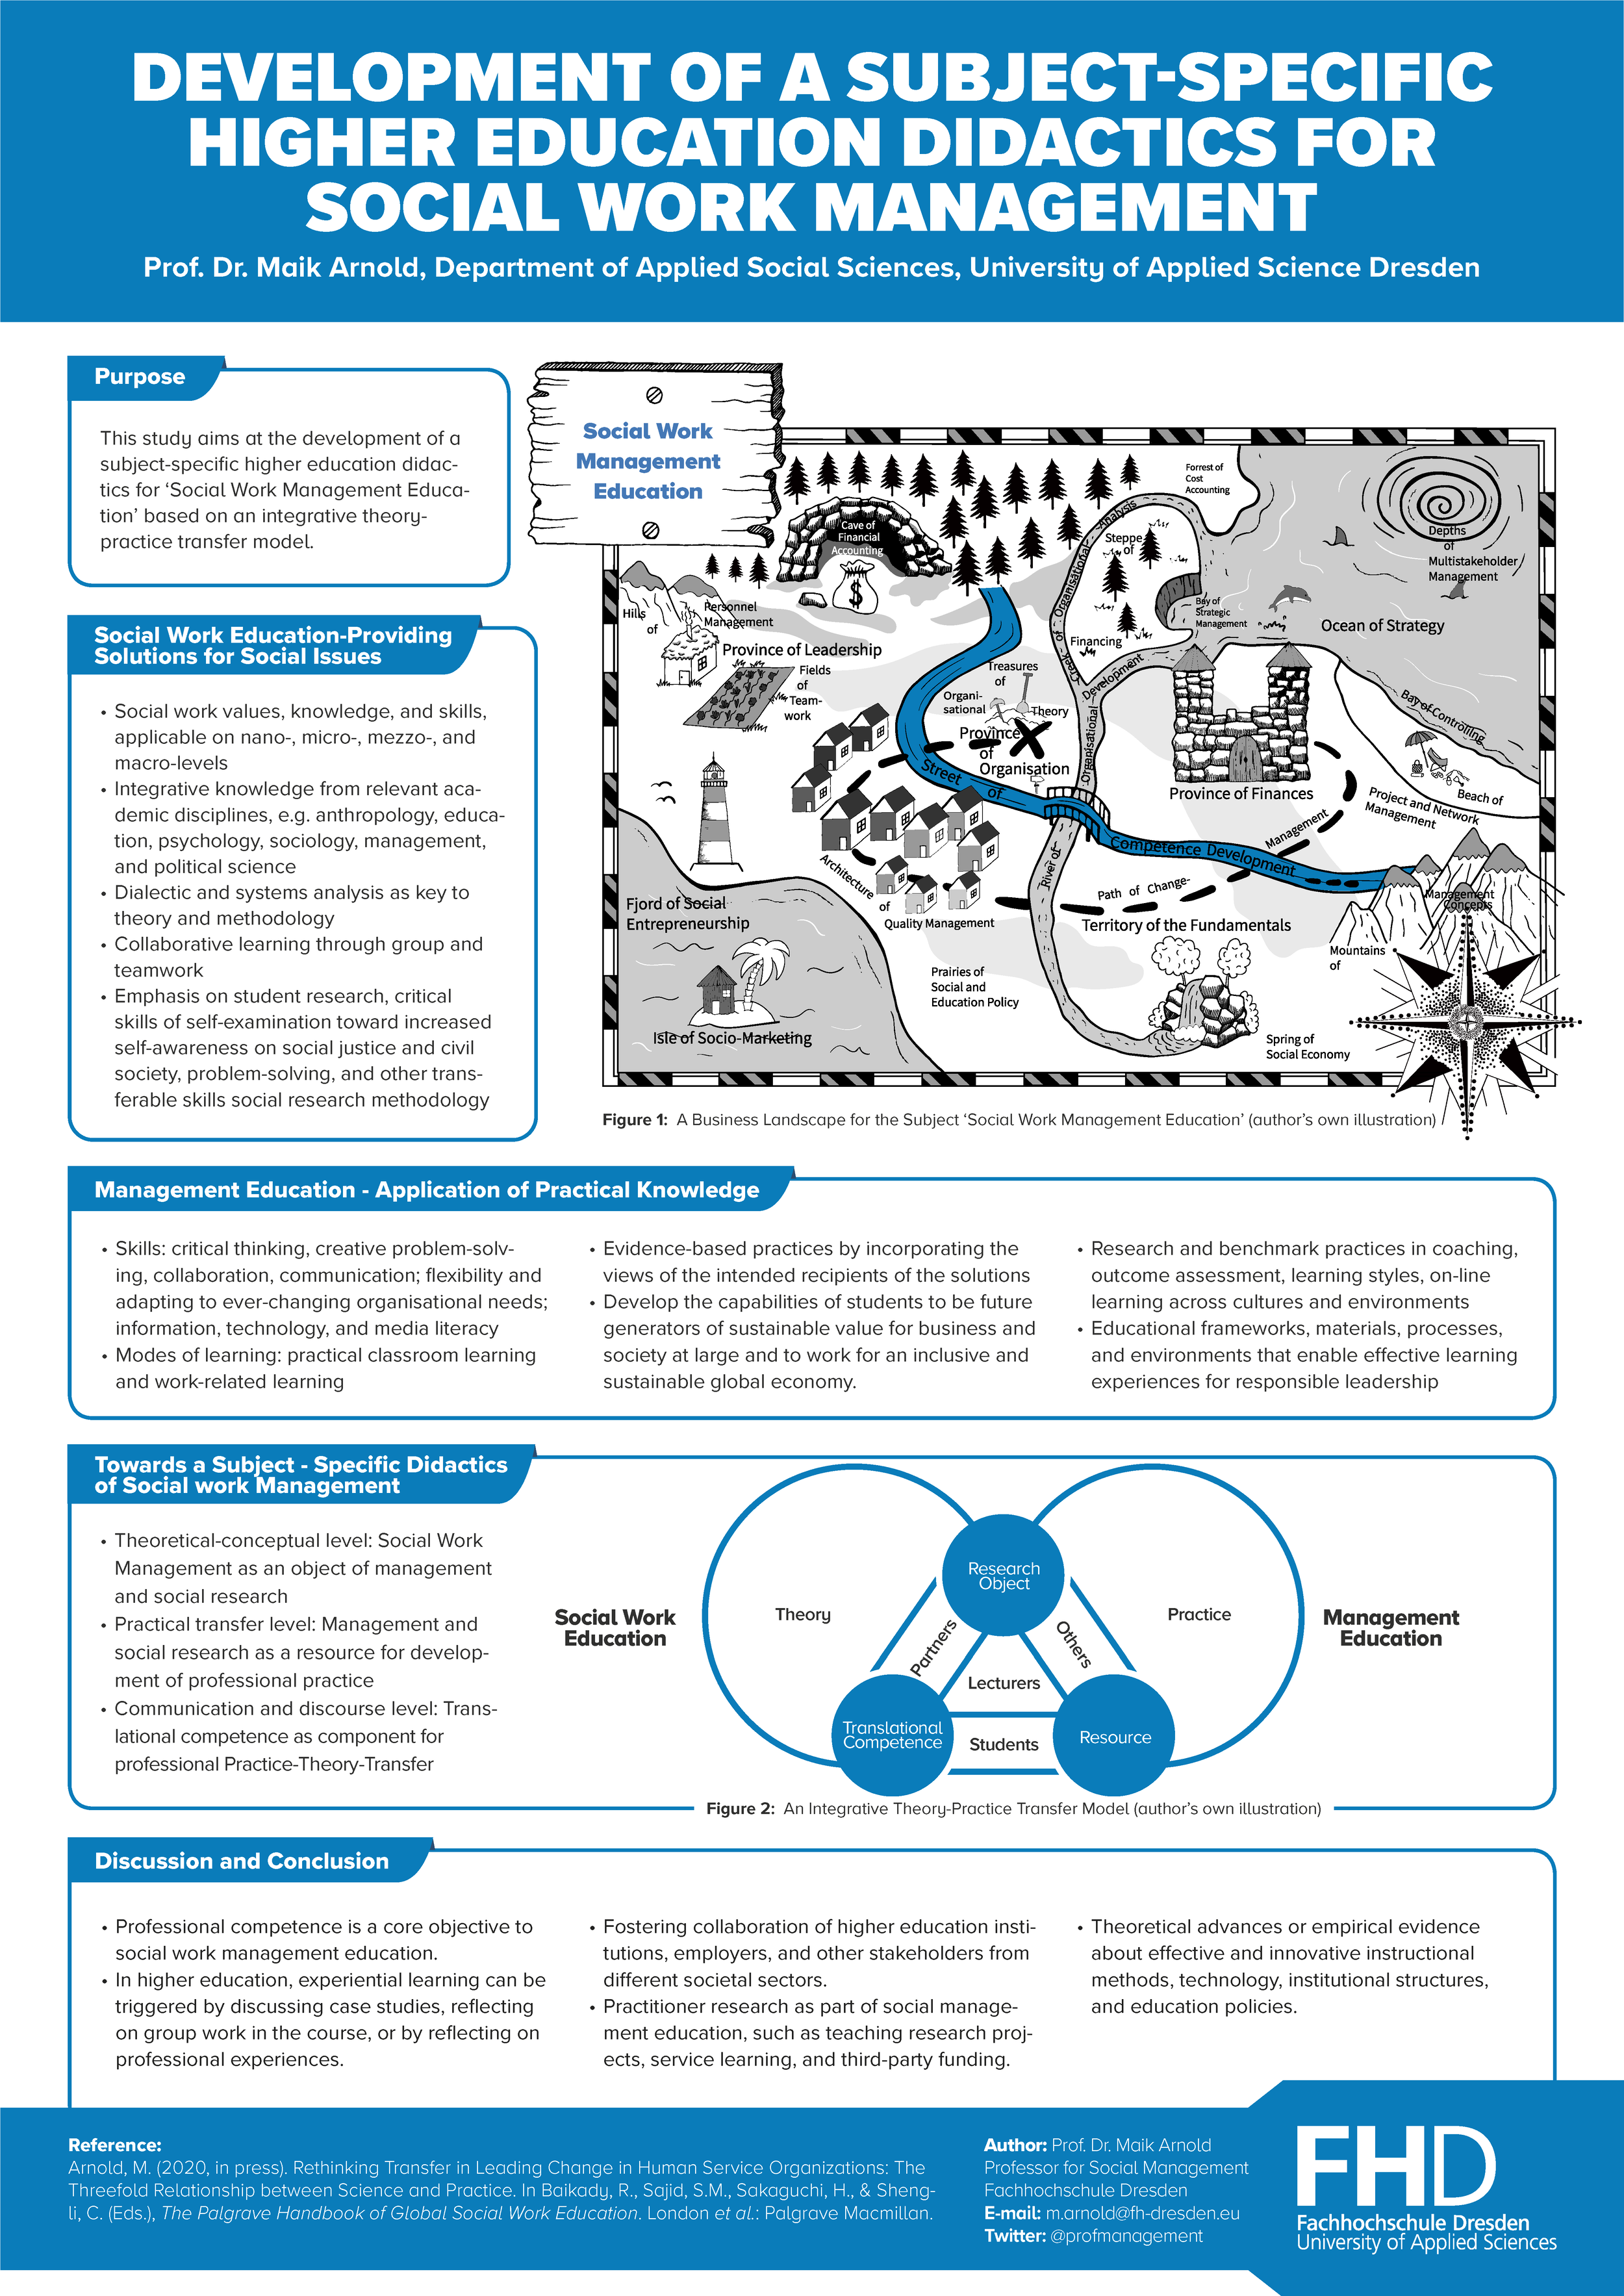 Development of a Subject-Specific Higher Education Didactics for Social Work Management (Poster)